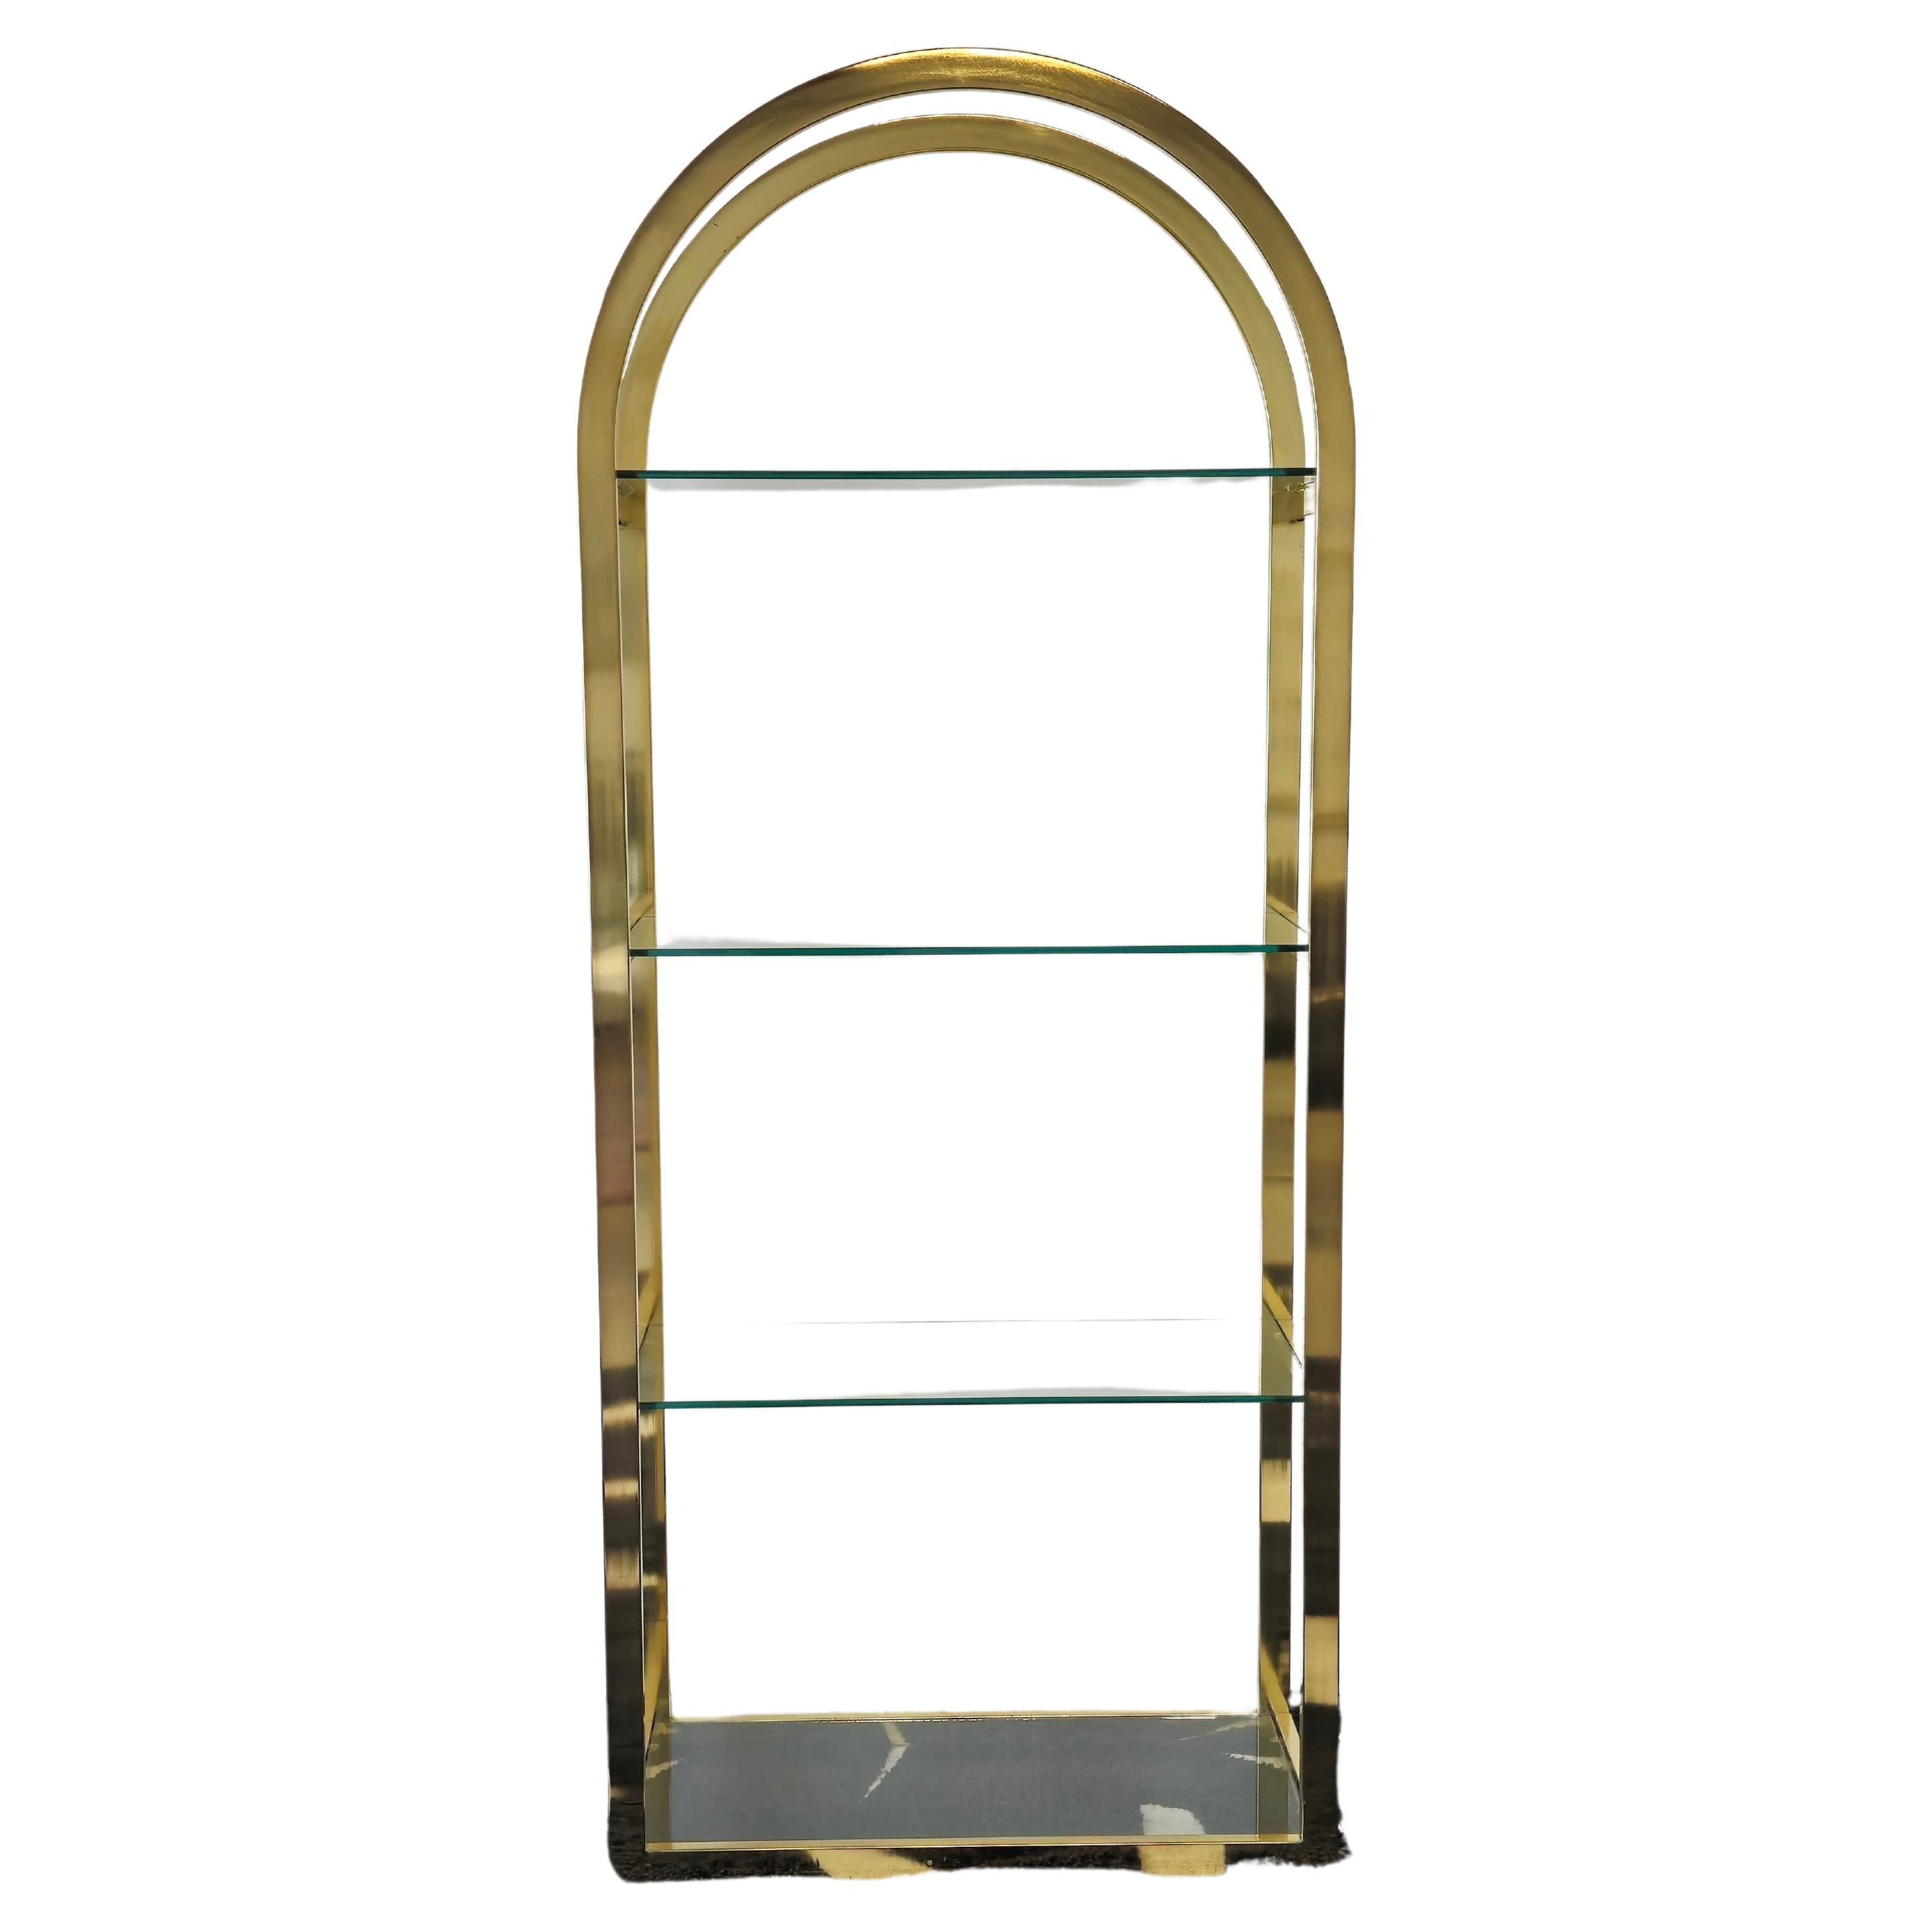 Stunning brass and glass etagere. This etagere has a brass frame with an arch top and floating glass shelves. The brass body is well crafted with seamless lines. There are four glass shelves, three of which sit on the edges of the brass frame giving